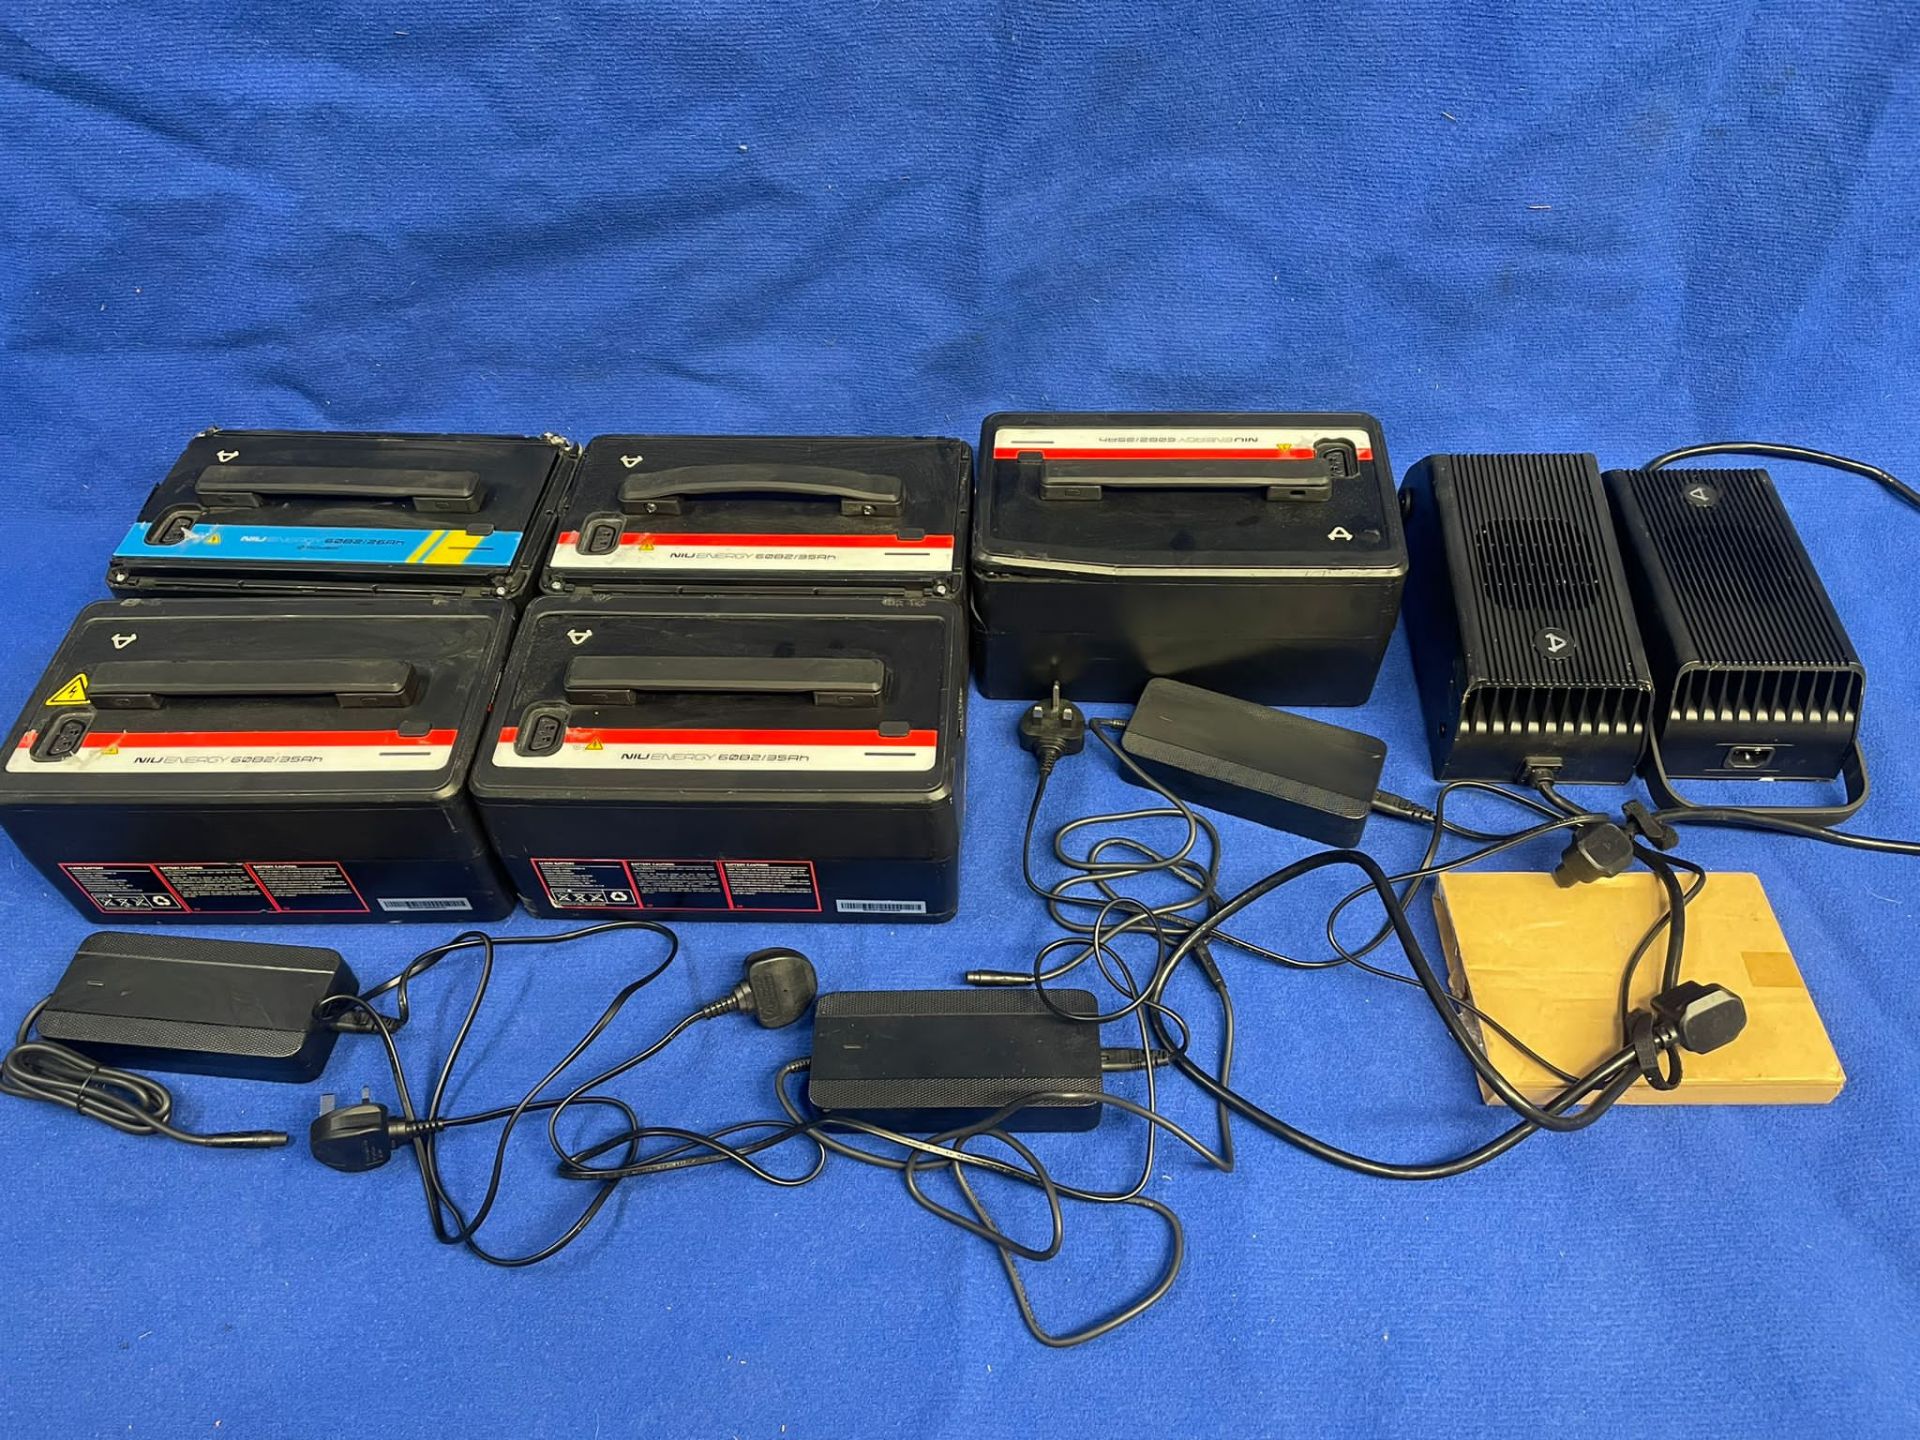 10 x Niu GTS & Sunra Robo S Electric Moped Scooters With Logbooks, Keys & Spares - Image 4 of 61